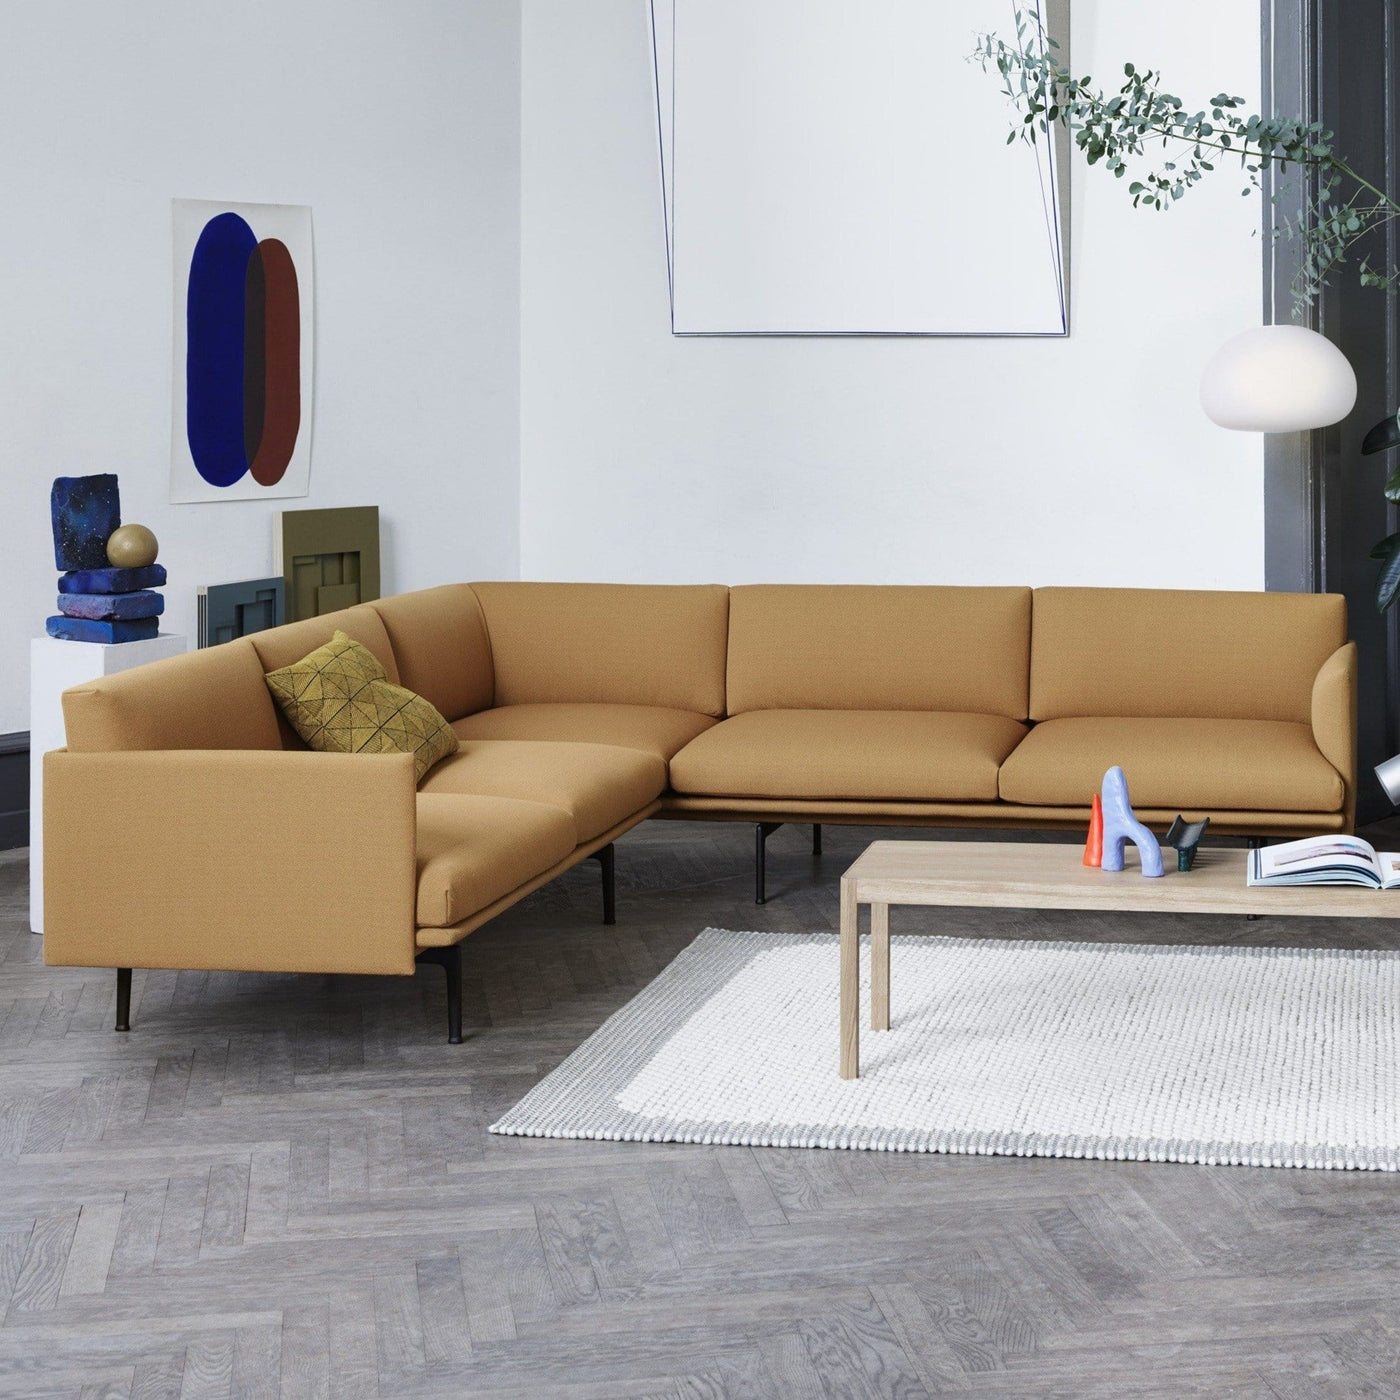 Muuto Outline Corner Sofa in cognac refine leather in a living room setting. Available made to order from someday designs. #colour_cognac-refine-leather